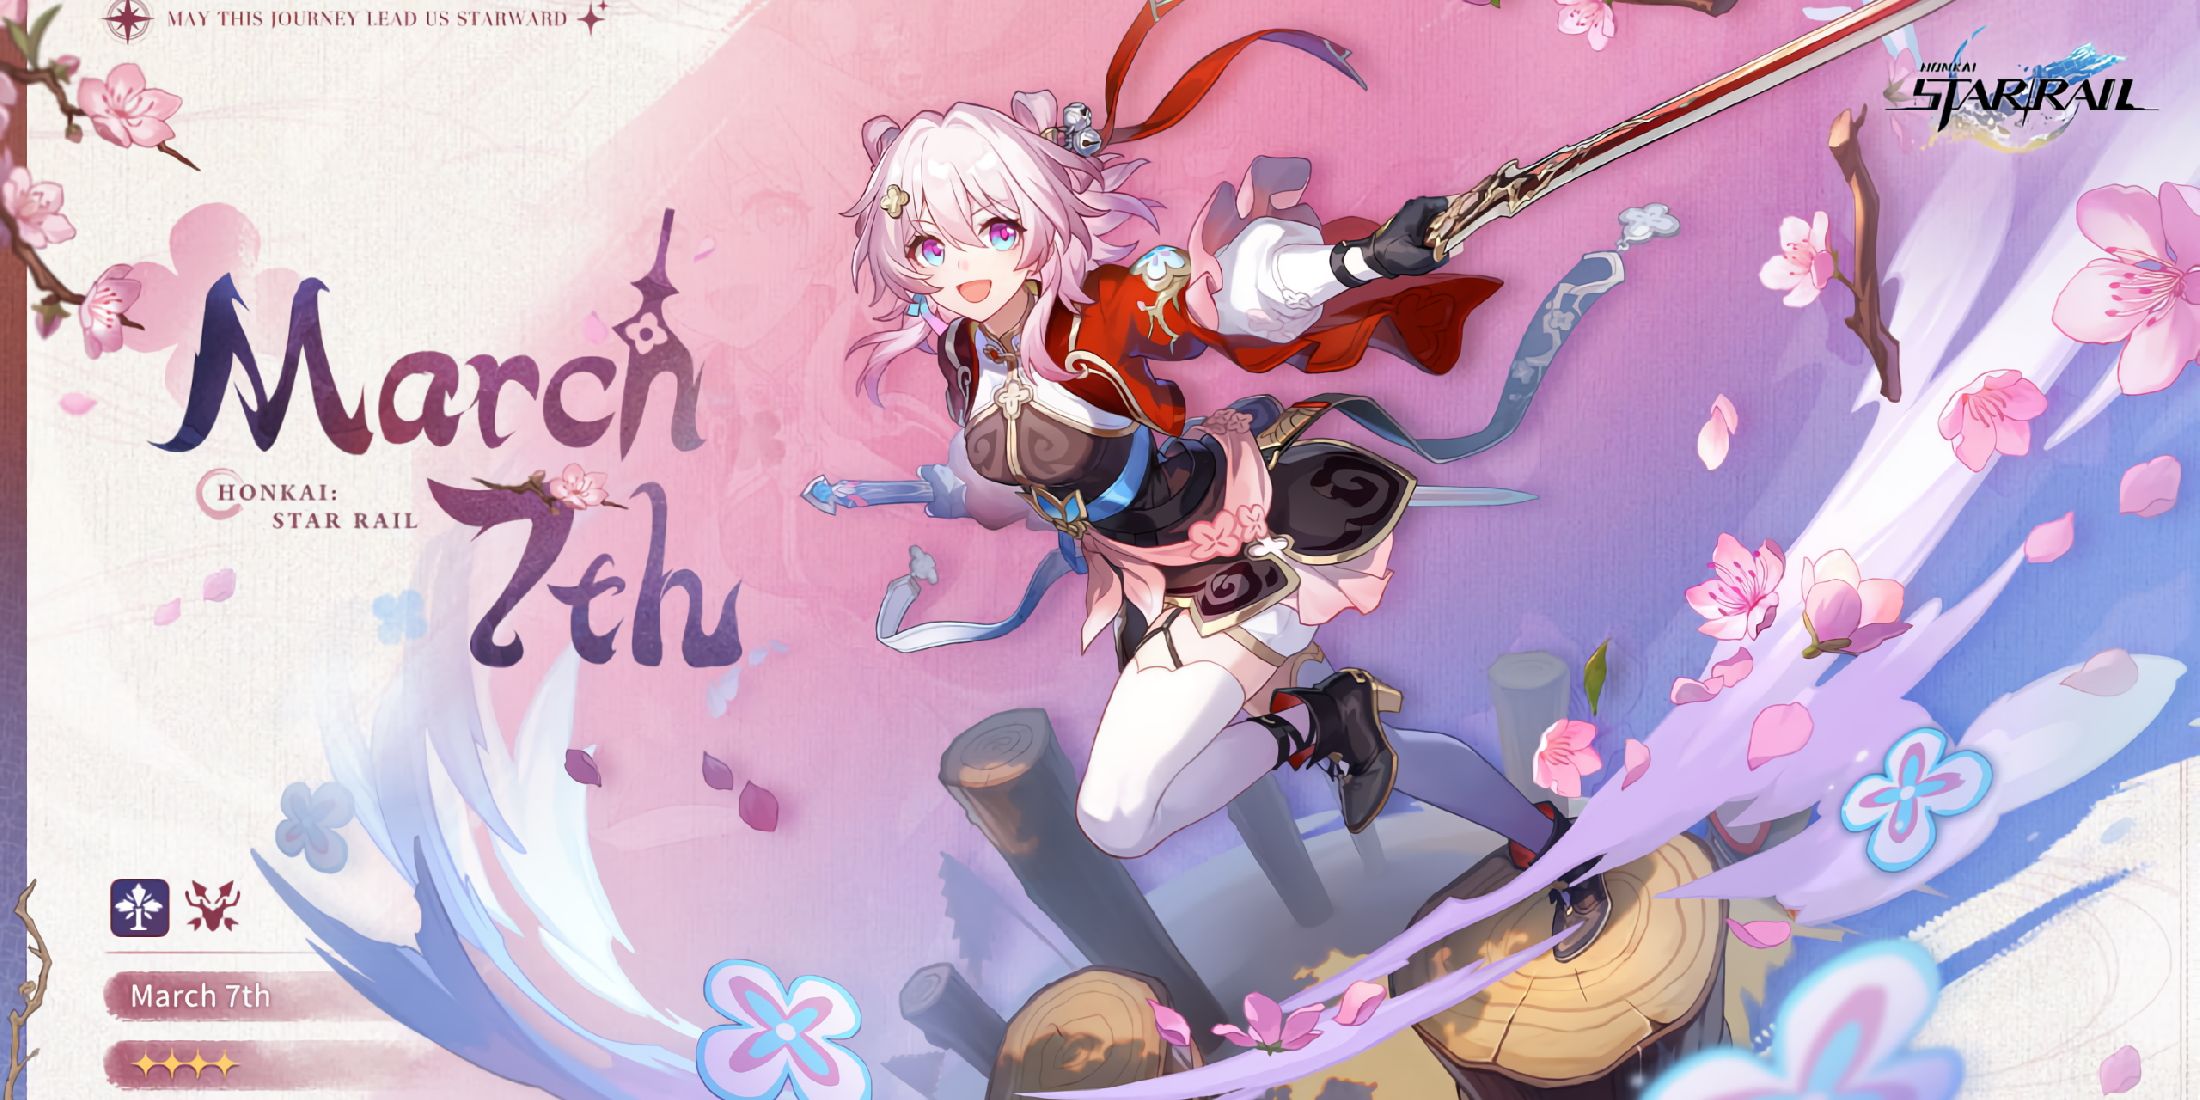 The splash art reveal for March 7th's new form in Honkai: Star Rail